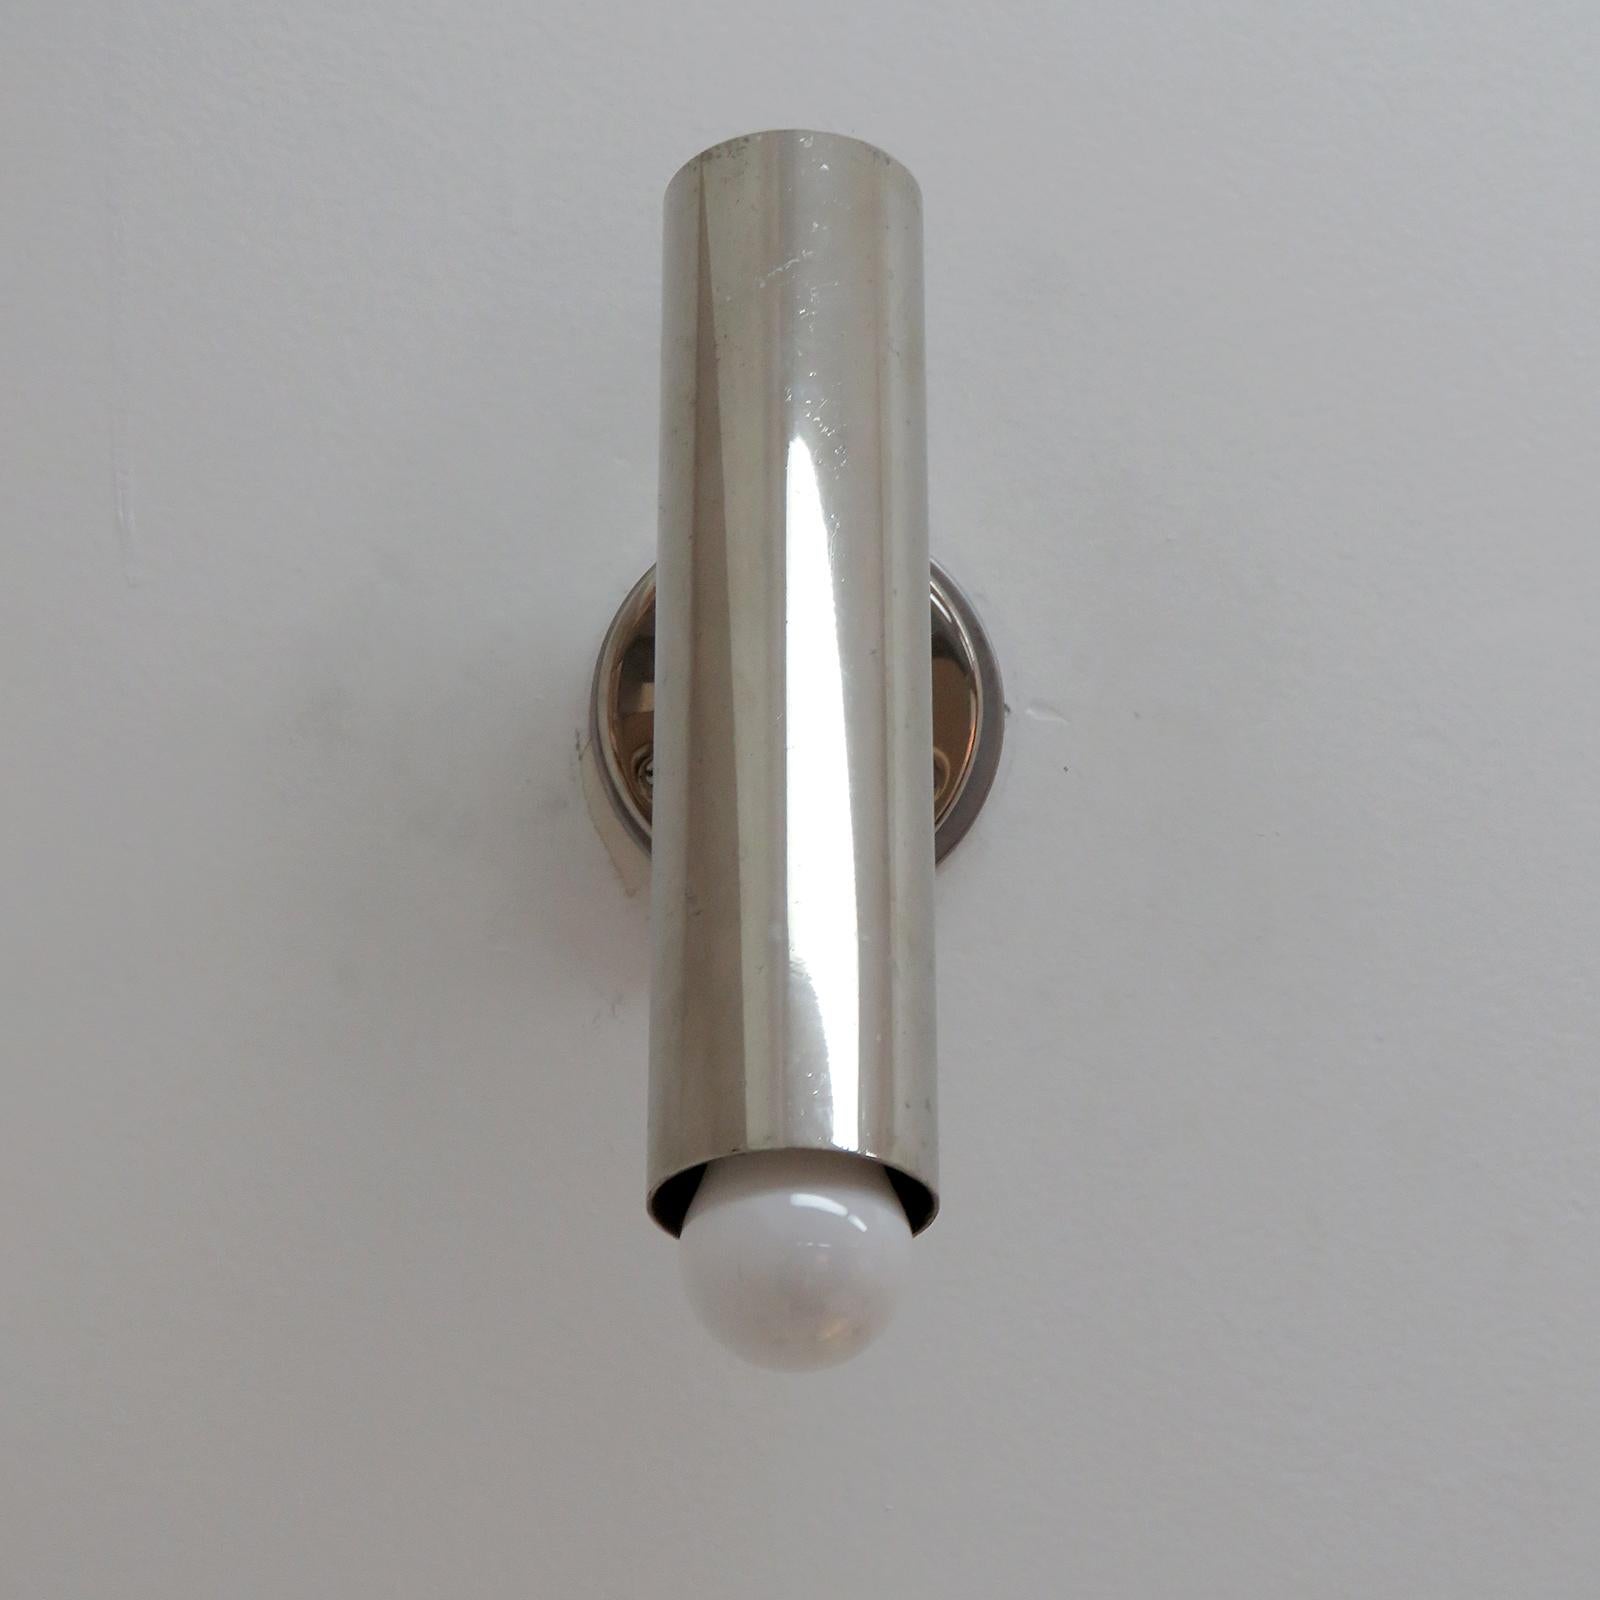 wonderful pair of chrome plated LITA wall lights, fully adjustable in all directions, the body (d=2.75